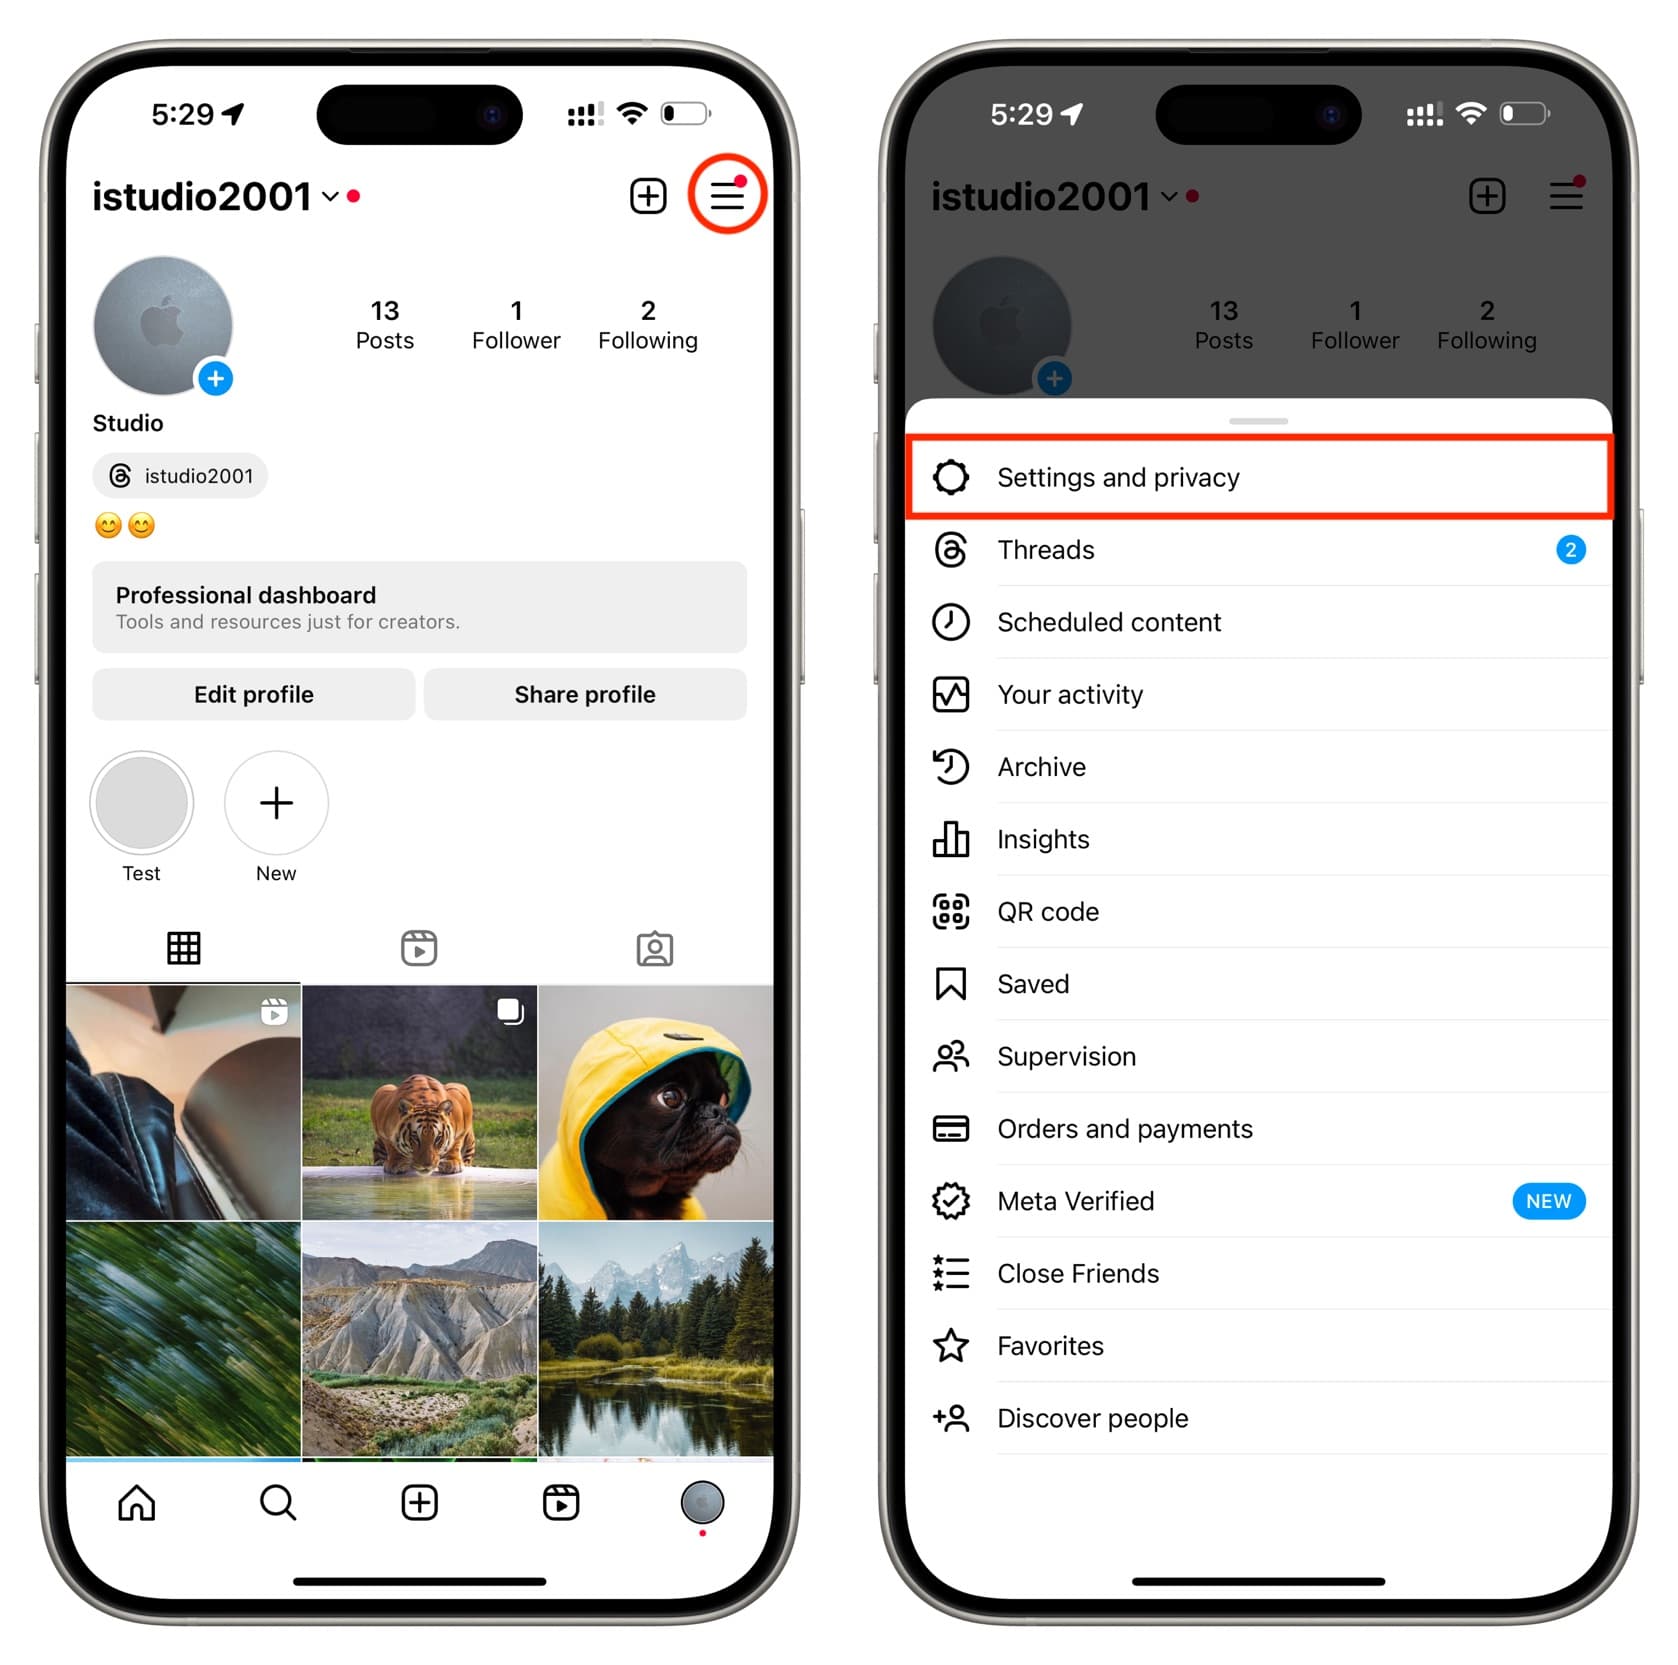 Go to Instagram profile and tap menu icon Settings and privacy